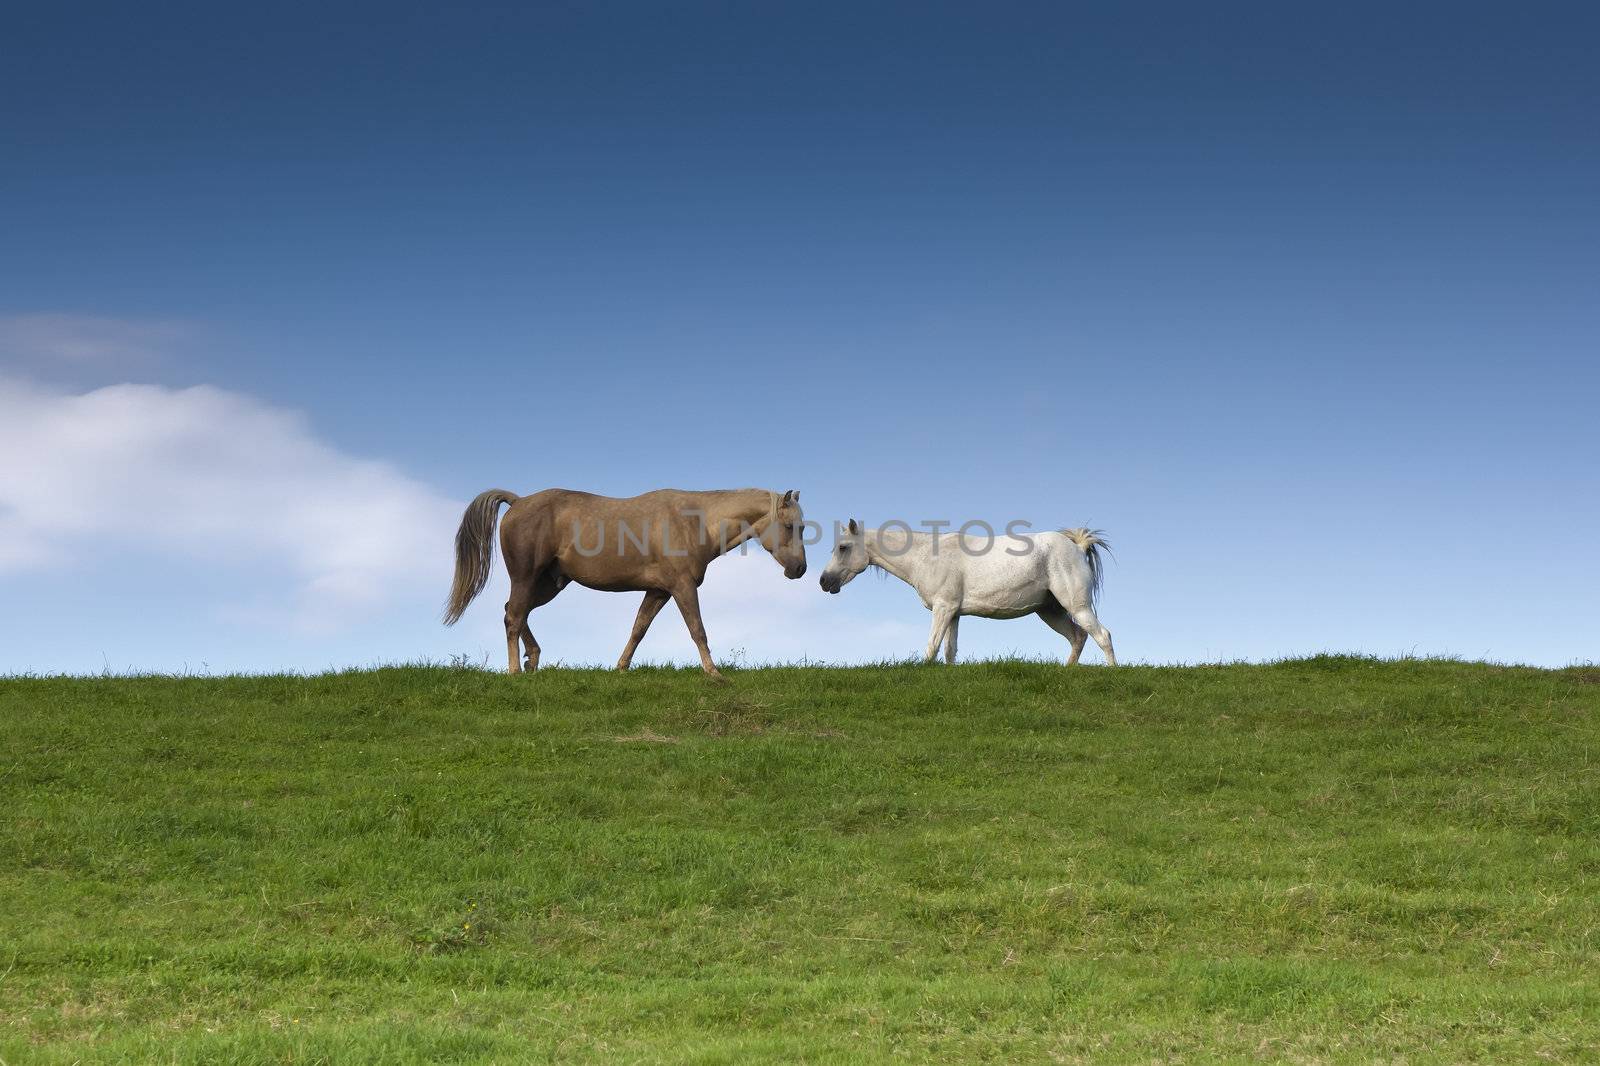 An image of two horses eating grass